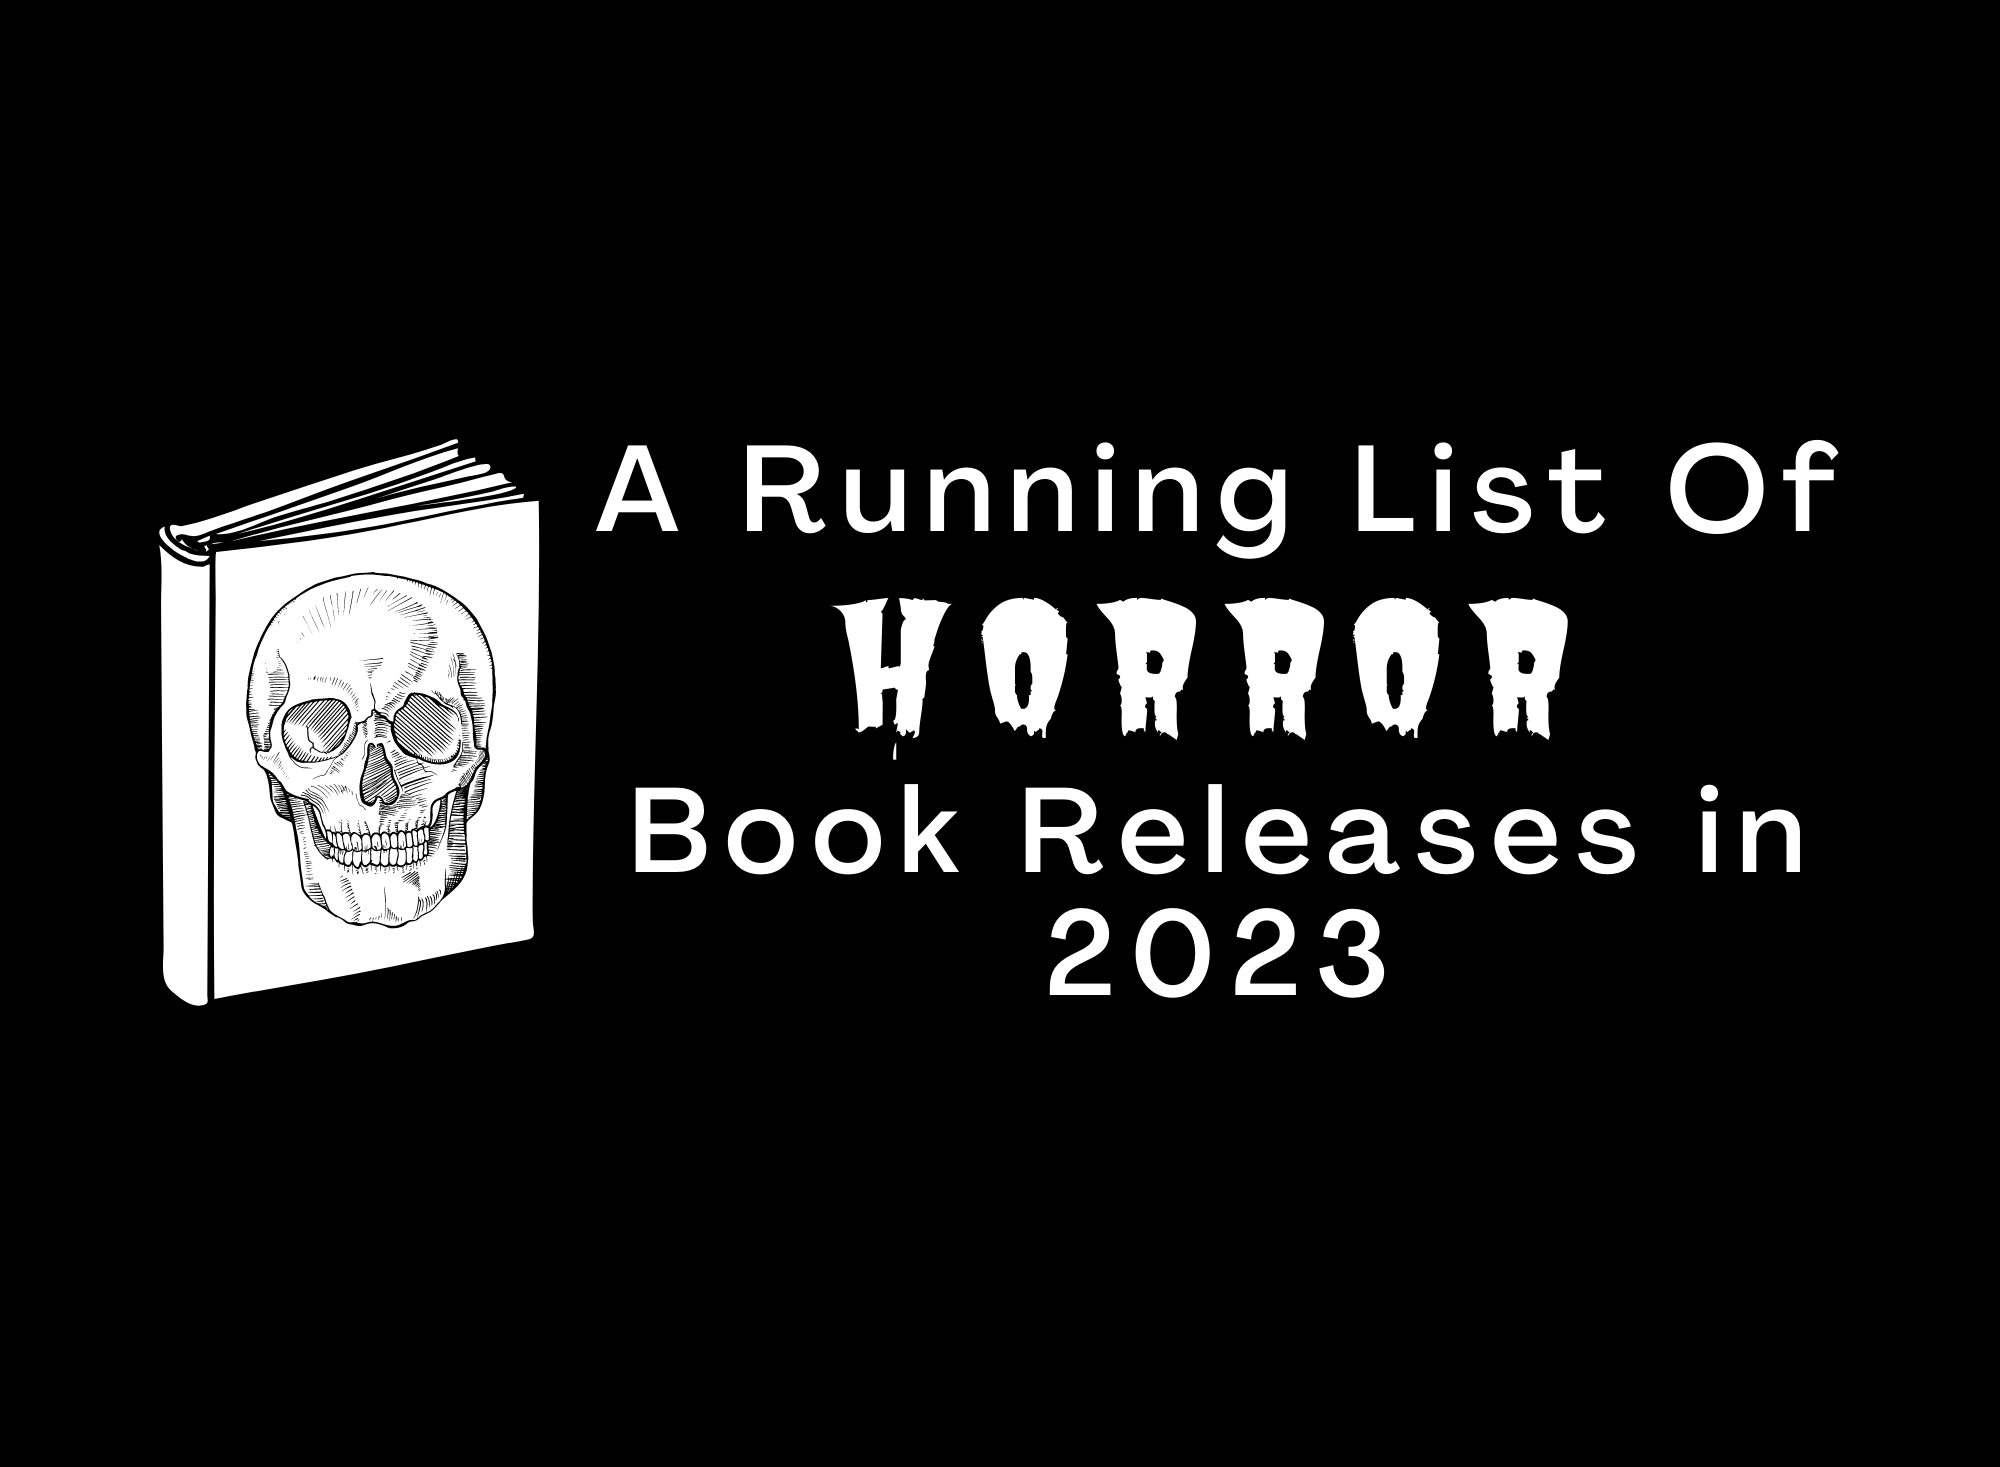 A Running List of 2023 Horror Book Releases image pic